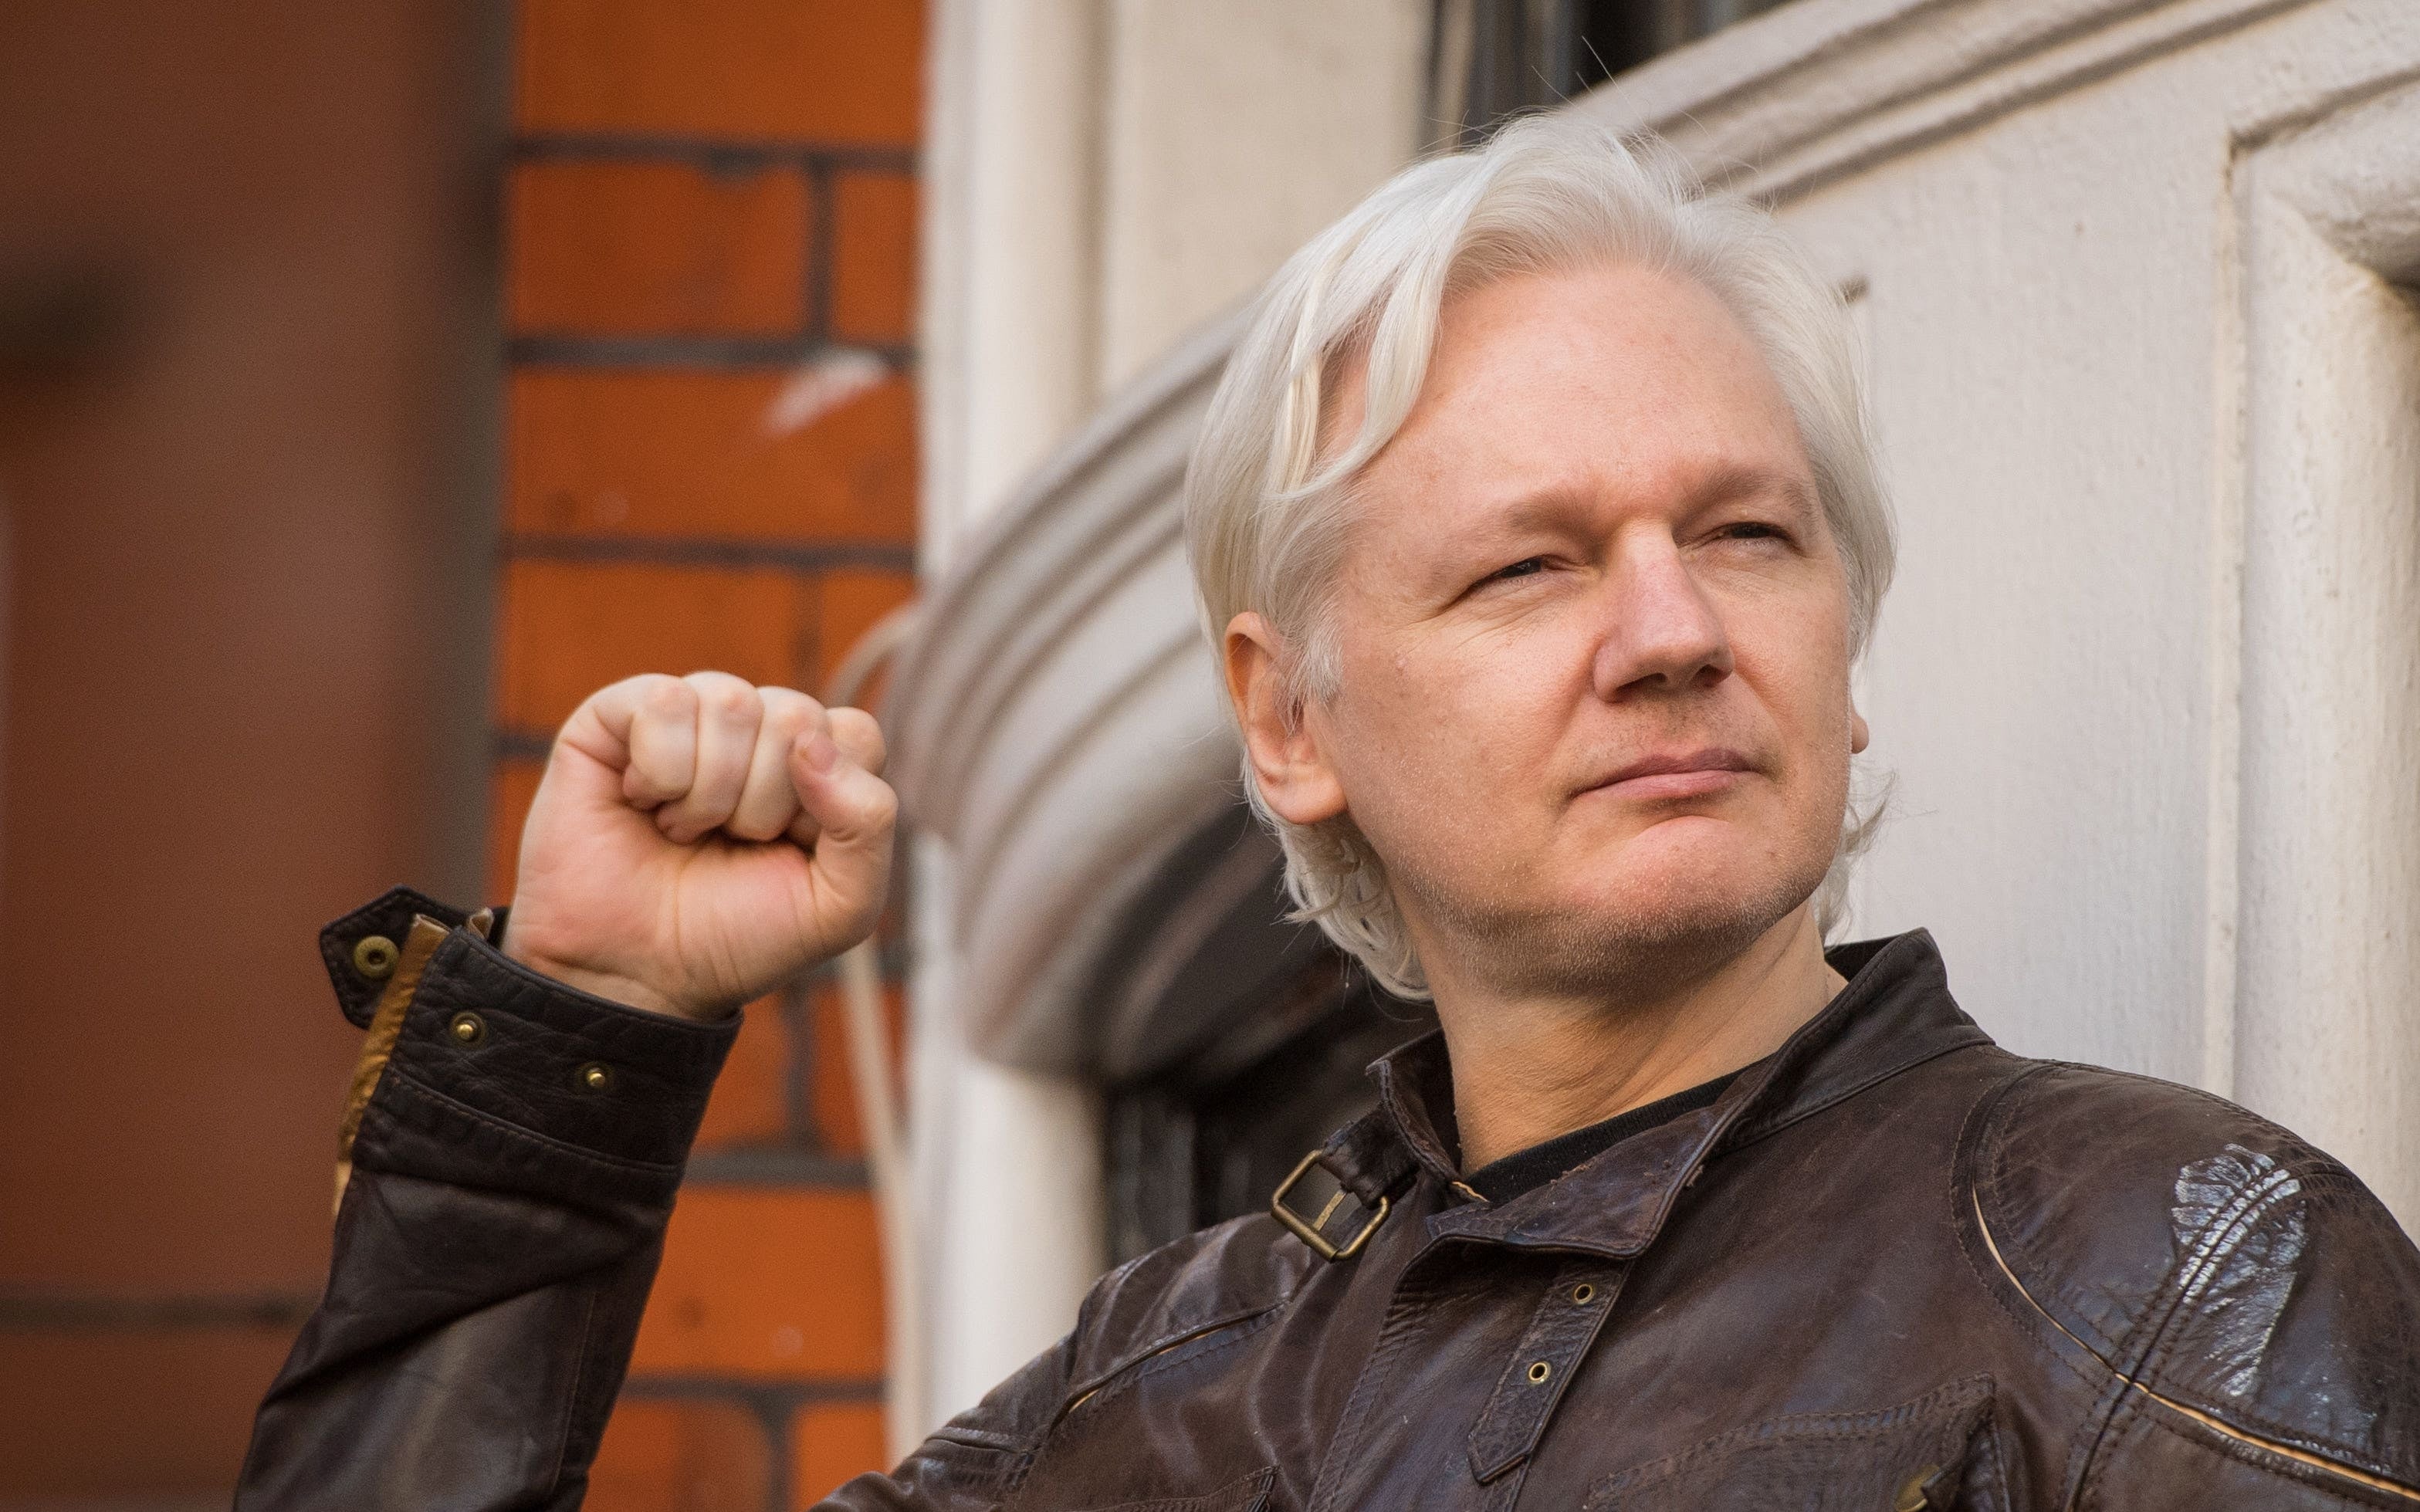 Julian Assange published 'stolen' military documents and is not an